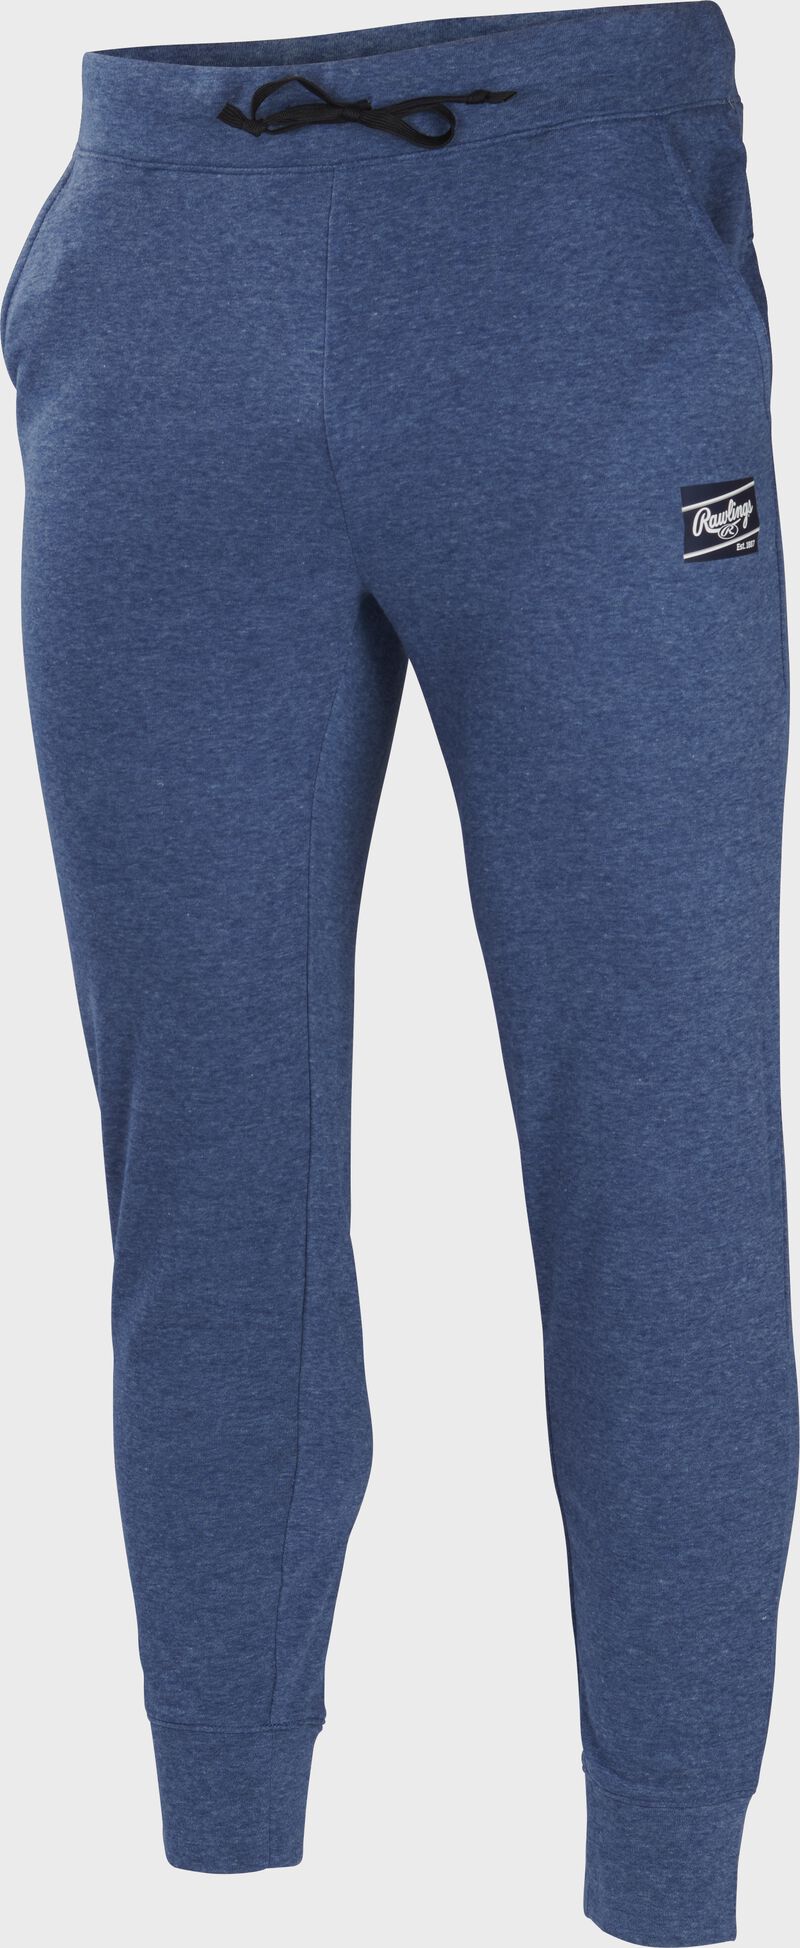 A pair of navy Rawlings women's french terry joggers - SKU: RSGWJG-N loading=